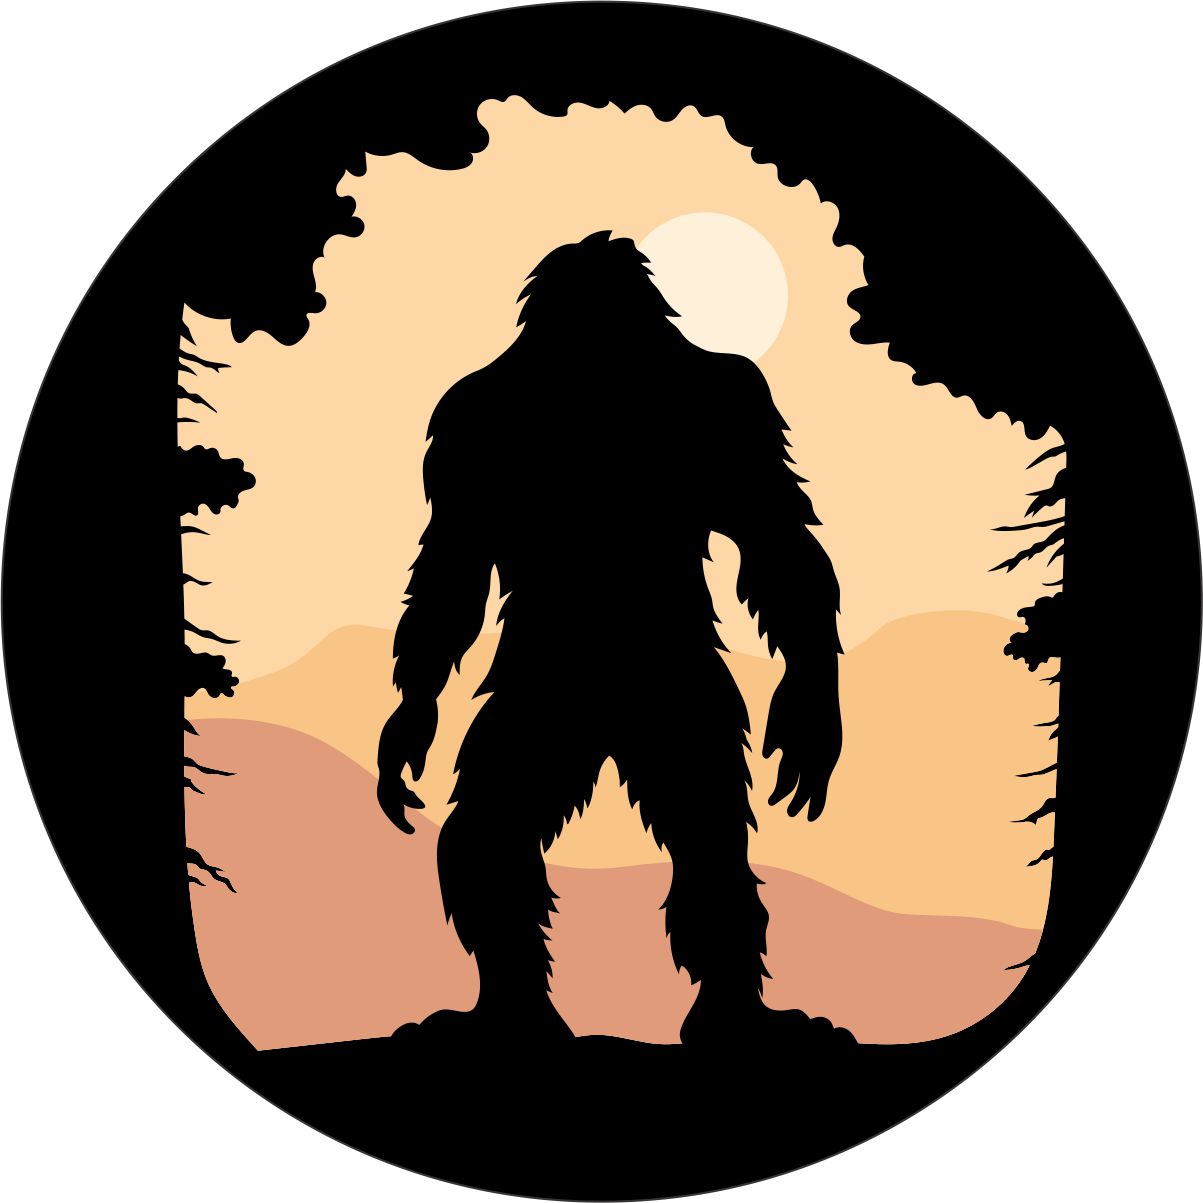 Scary silhouette of bigfoot sasquatch standing in a cave looking over the mountains